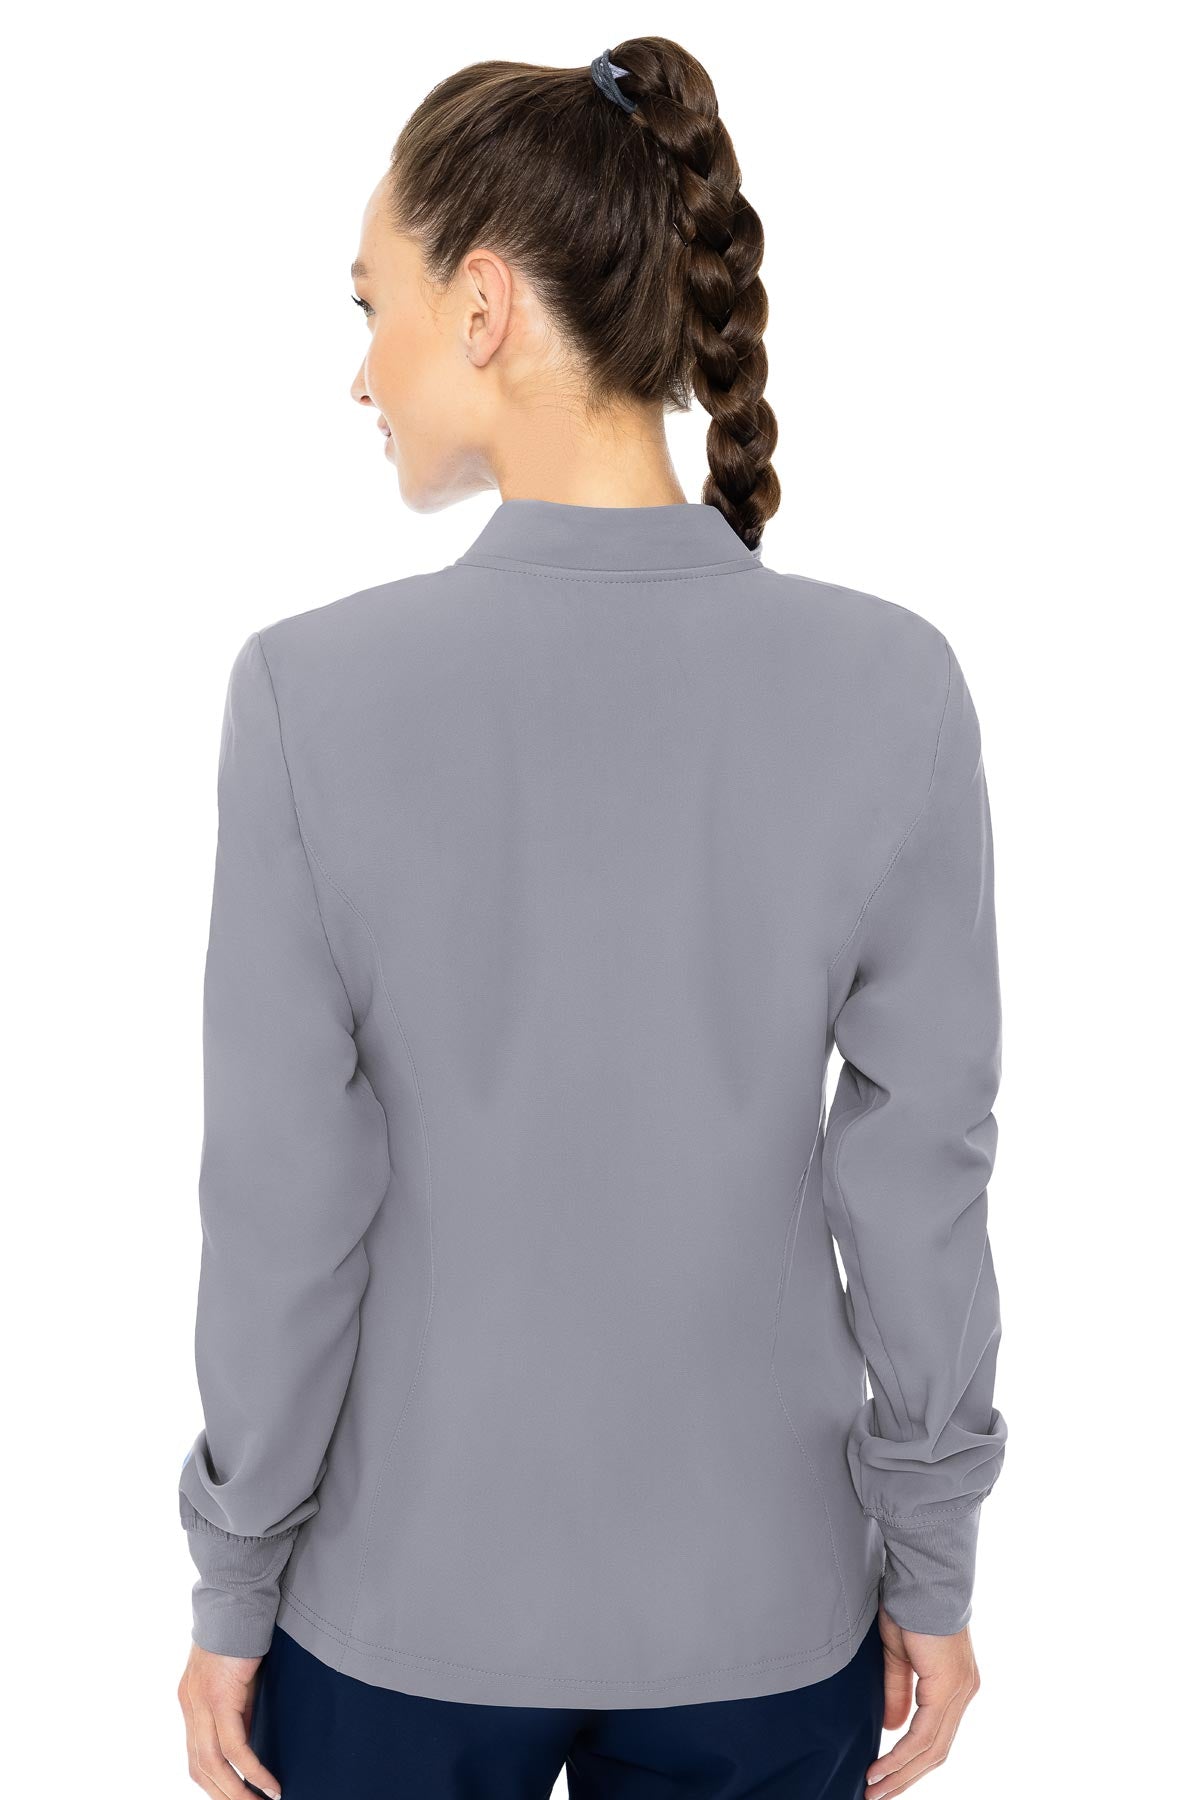 Zip Front Warm-Up With Shoulder Yokes  by Med Couture XS-5XL / Cloud